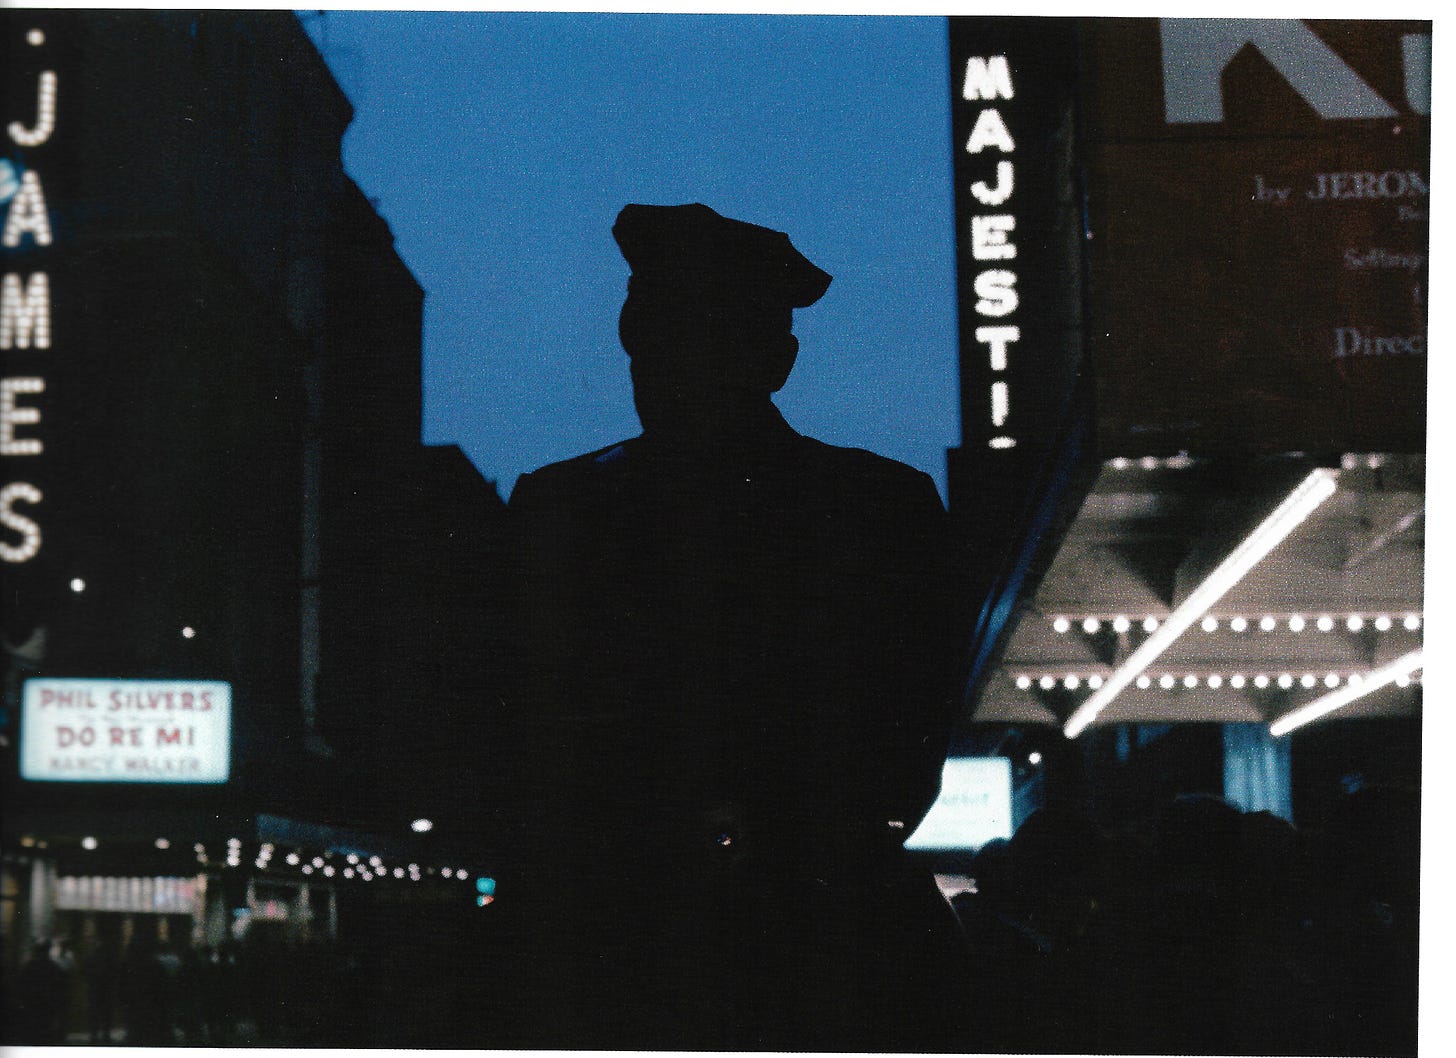 Policeman on the streets of Chicago, taken at night